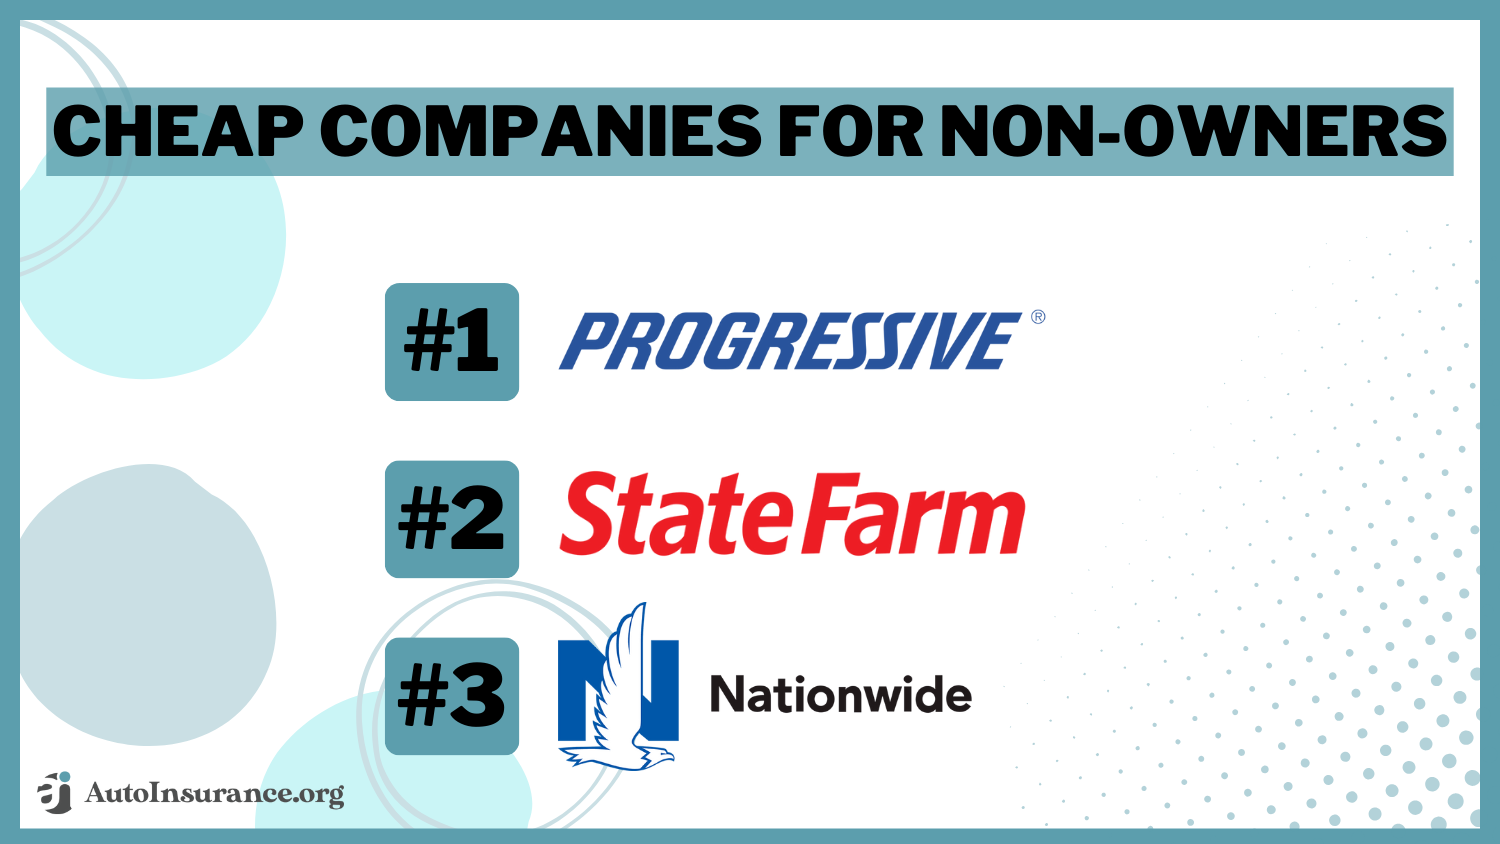 Cheap Companies for Non-Owners: Progressive, State Farm, Nationwide